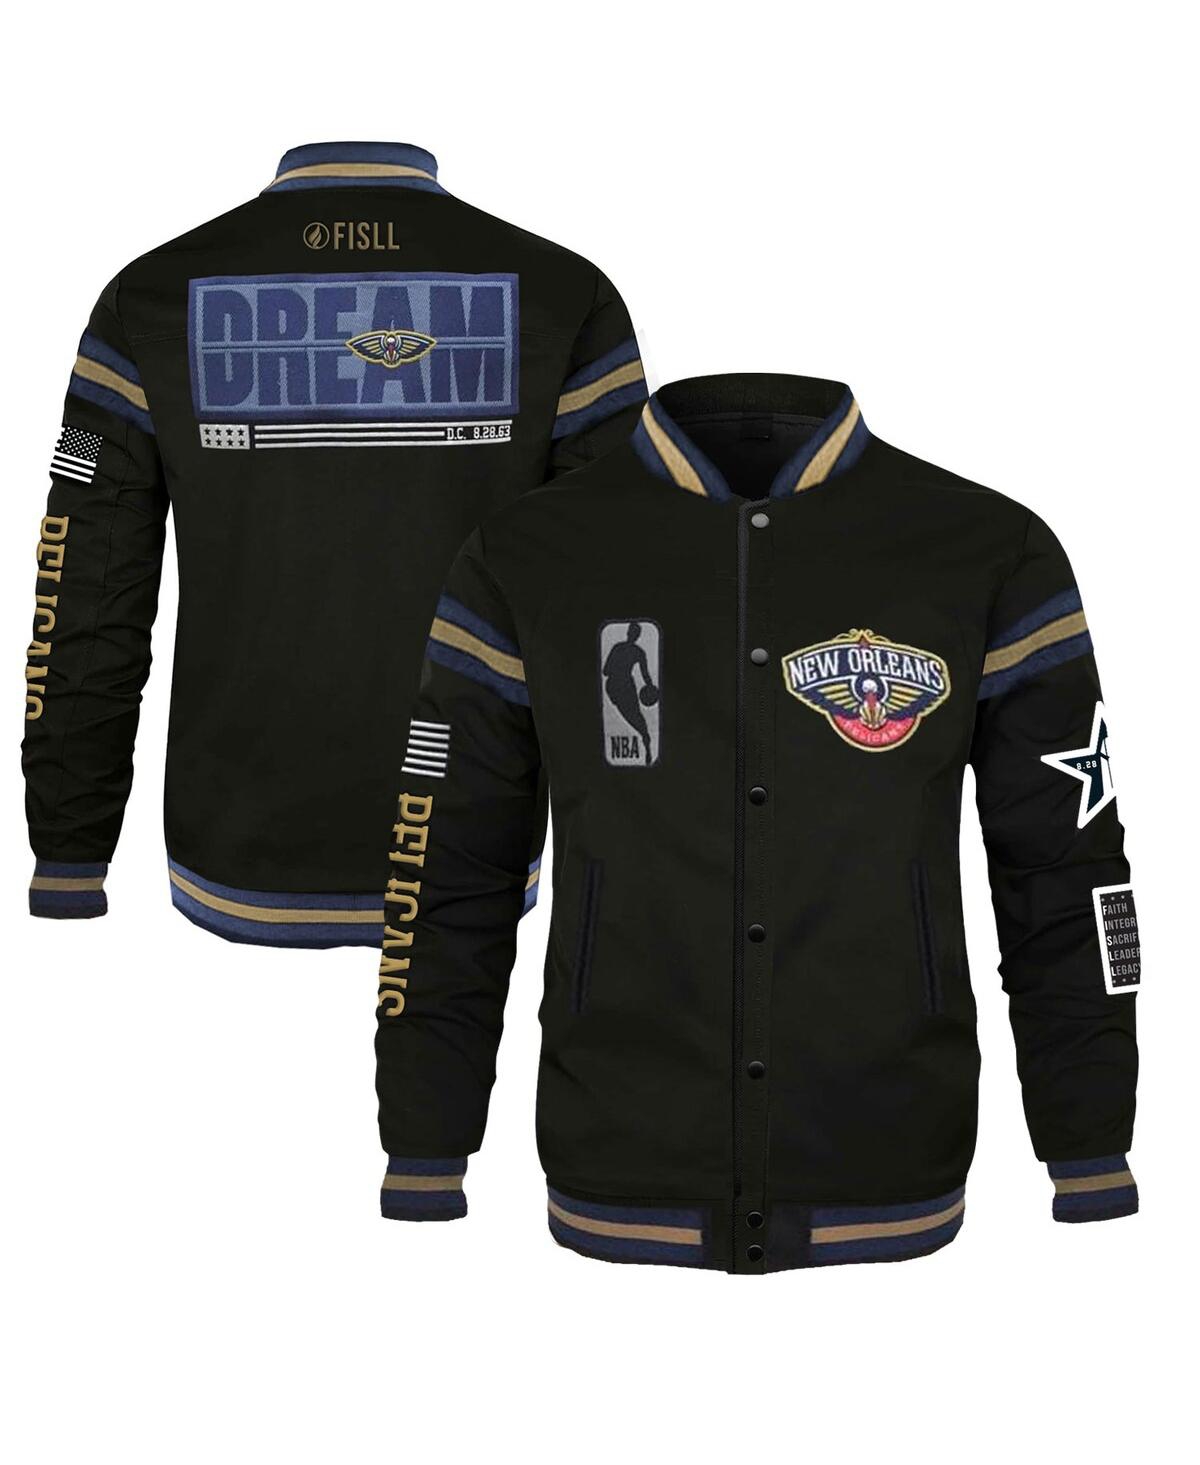 Men's and Women's Fisll x Black History Collection Black New Orleans Pelicans Full-Snap Varsity Jacket - Black